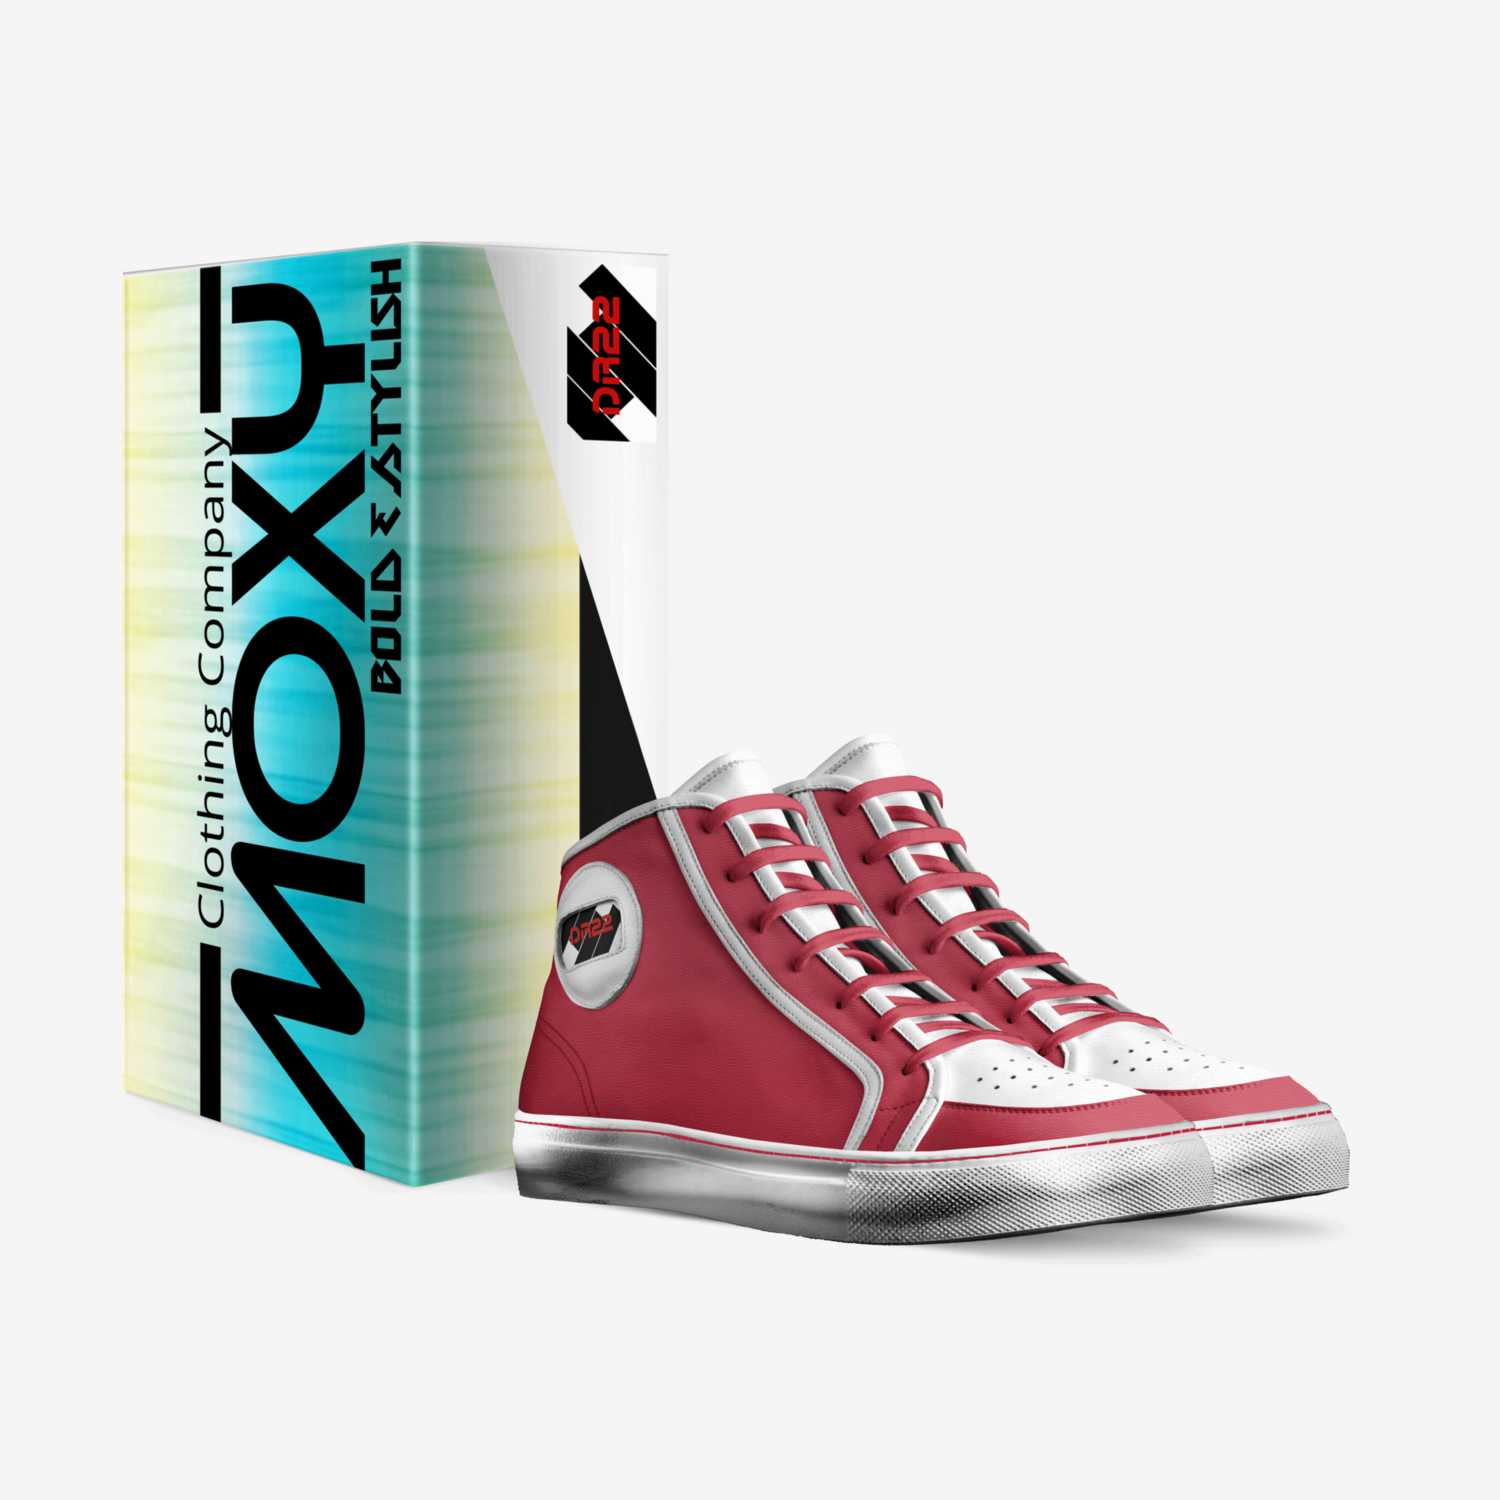 DR22 custom made in Italy shoes by Moxy Clothing Co. | Box view